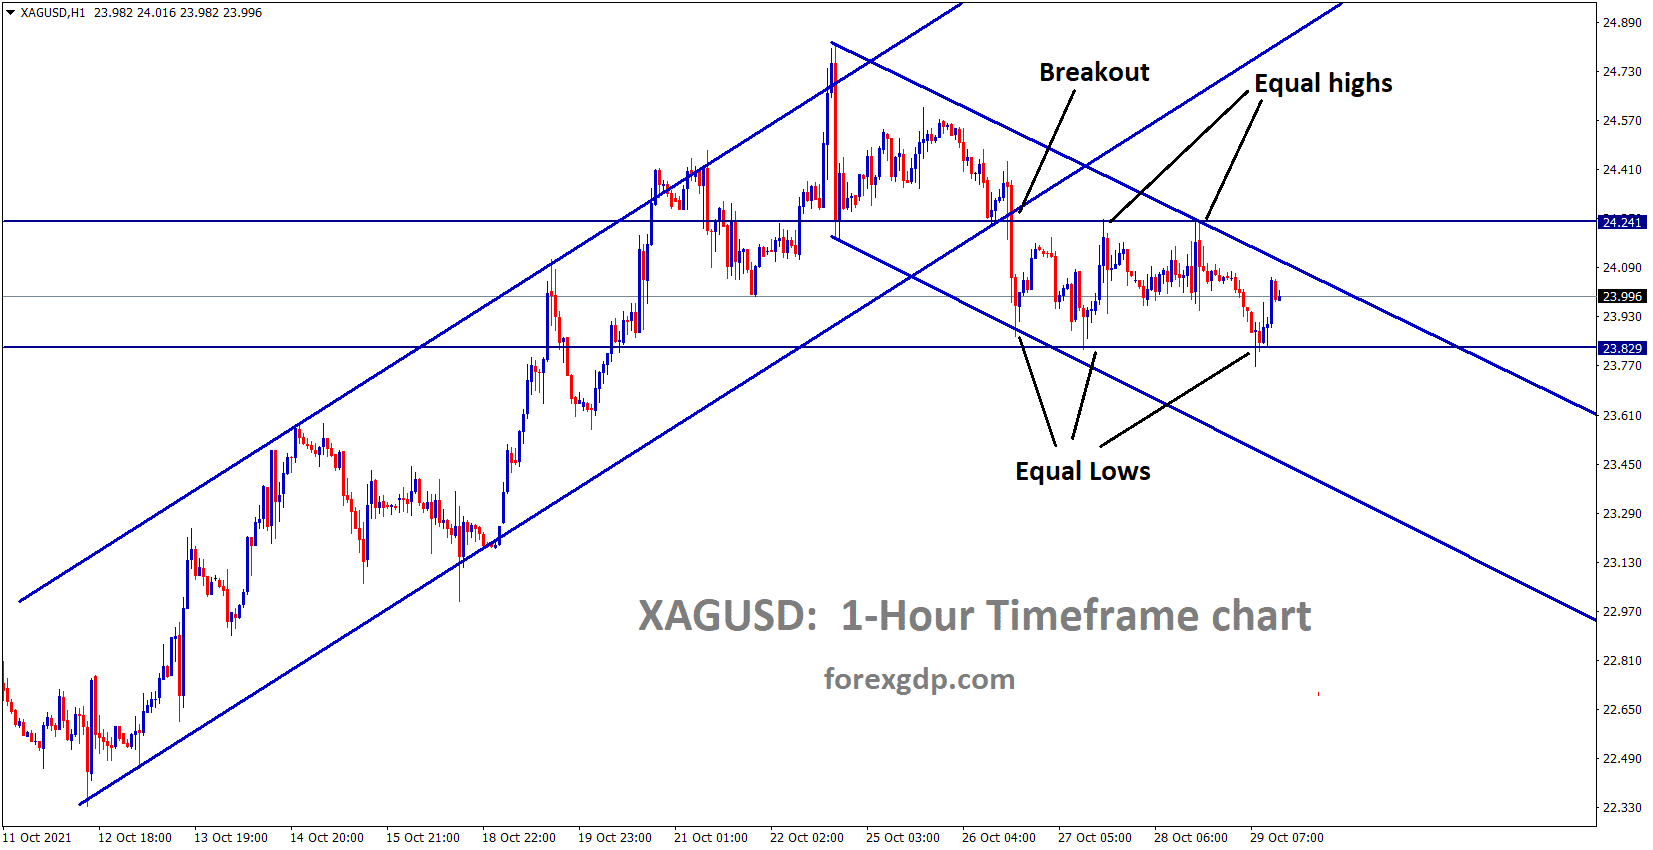 XAGUSD Silver price is broken an Ascending channel and moving in the minor Descending channel the market rebounded from Equal highs and Equal lows support area